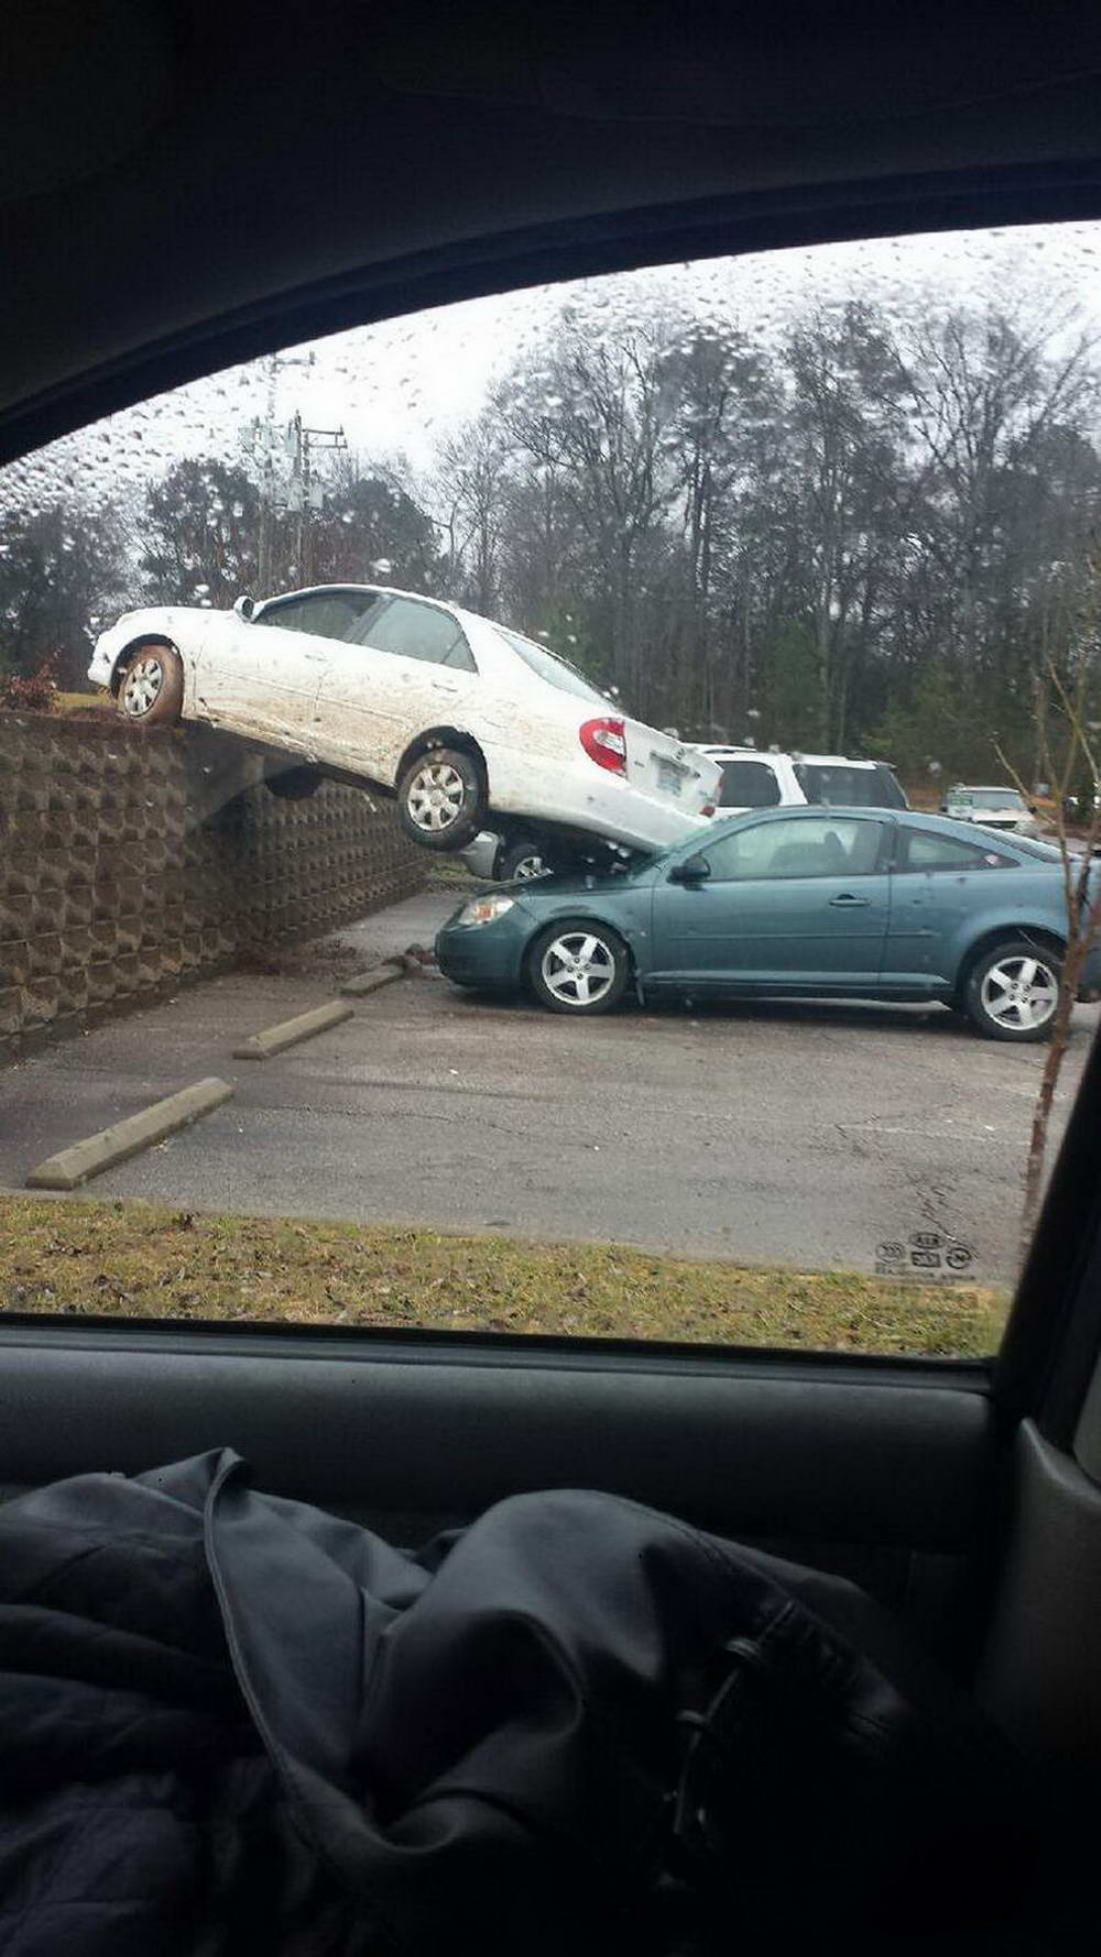 You cant park there